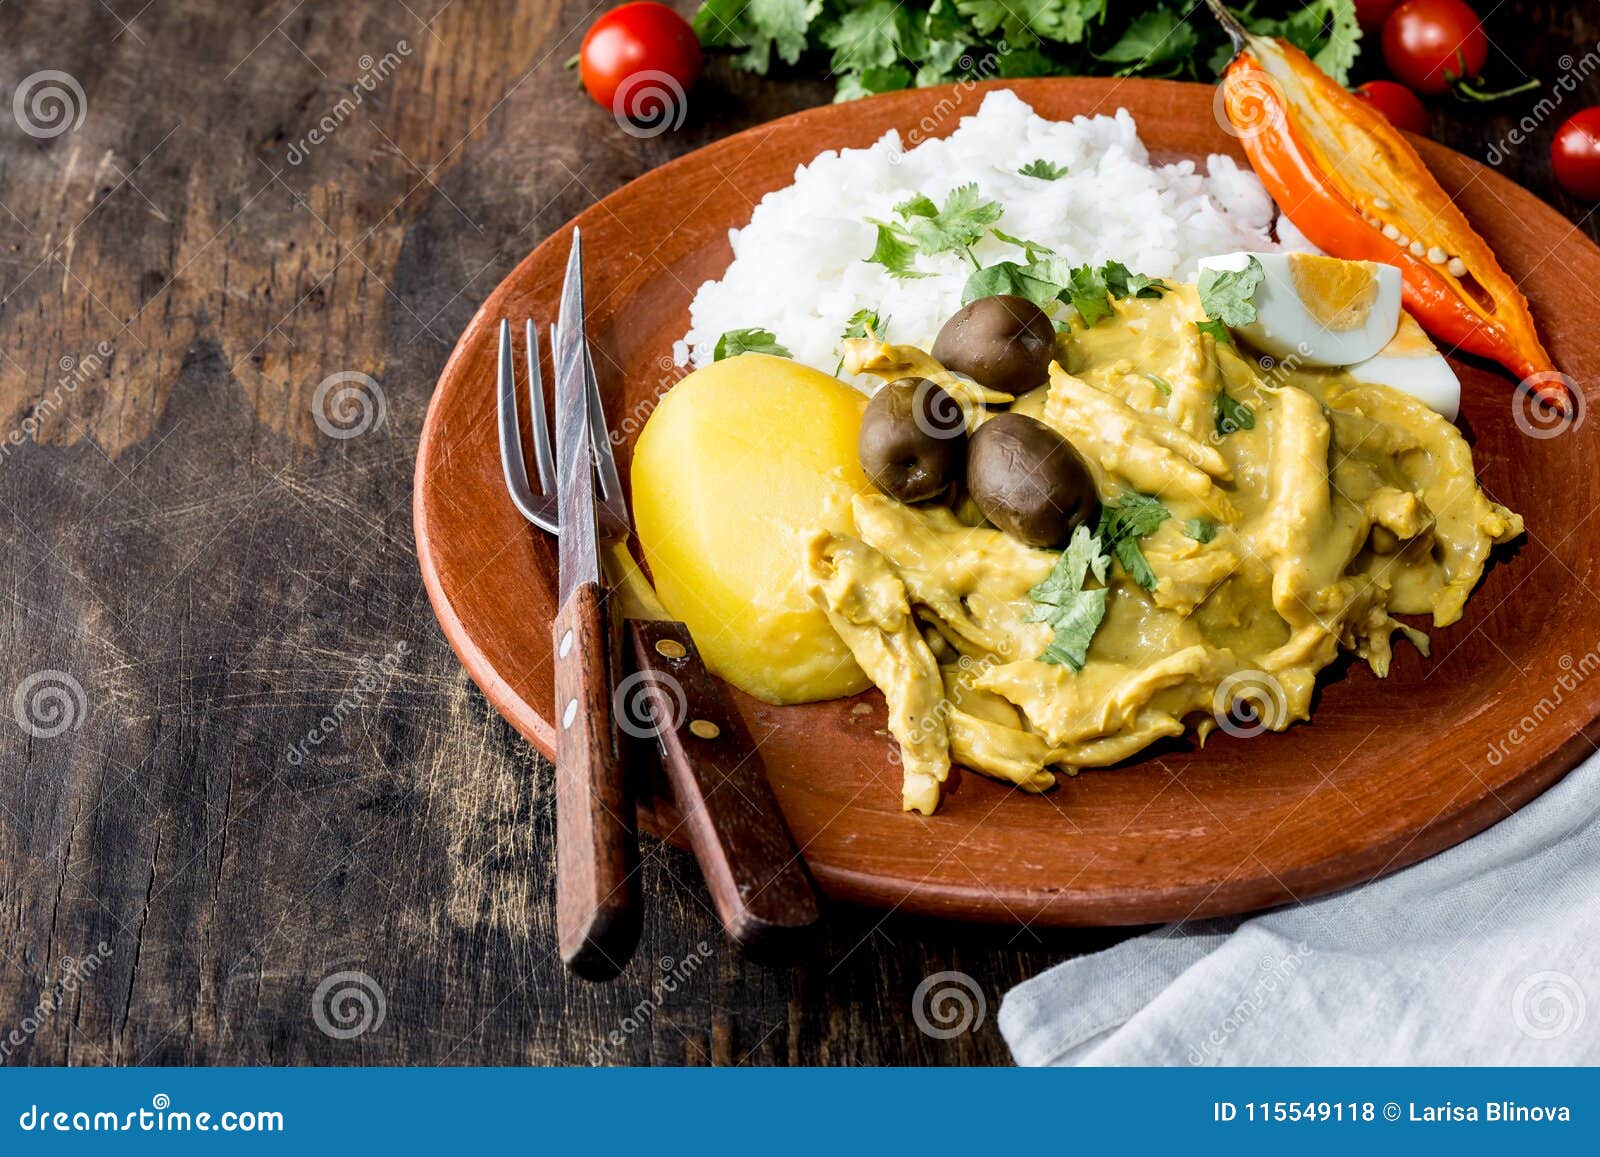 mexican and peruvian cuisine. aji de gallina. chicken aji de gallina with olives egg and rice on clay plate. tipical